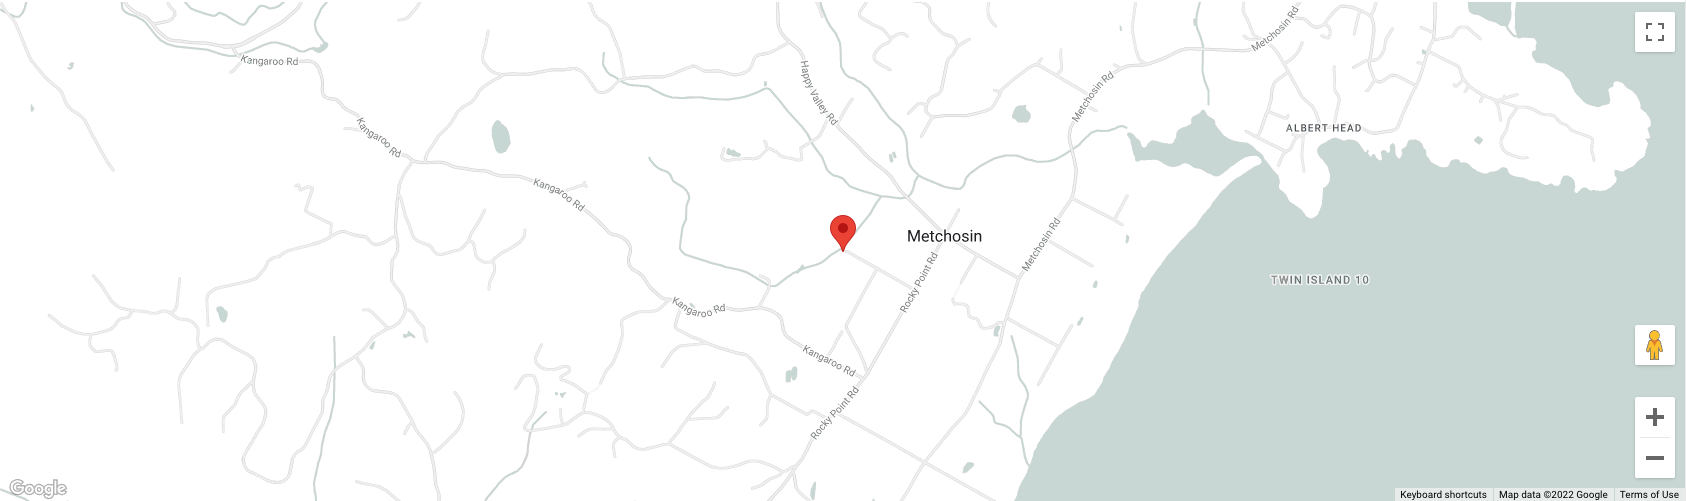 Placeholder map of Metchosin